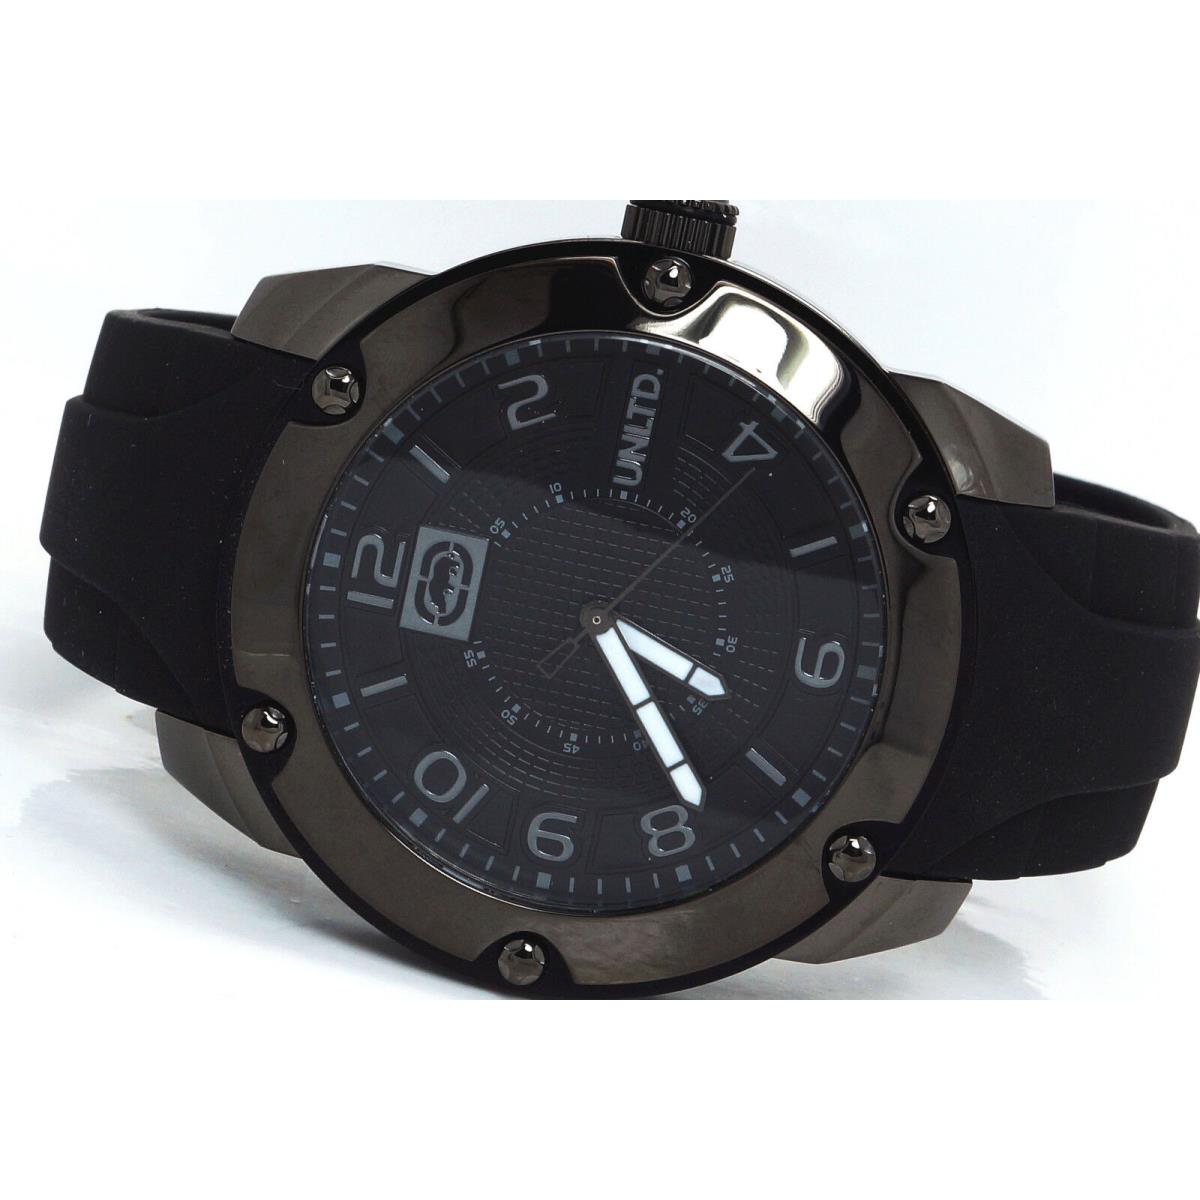 Marc Ecko E12527G2 The Solution Black Watch